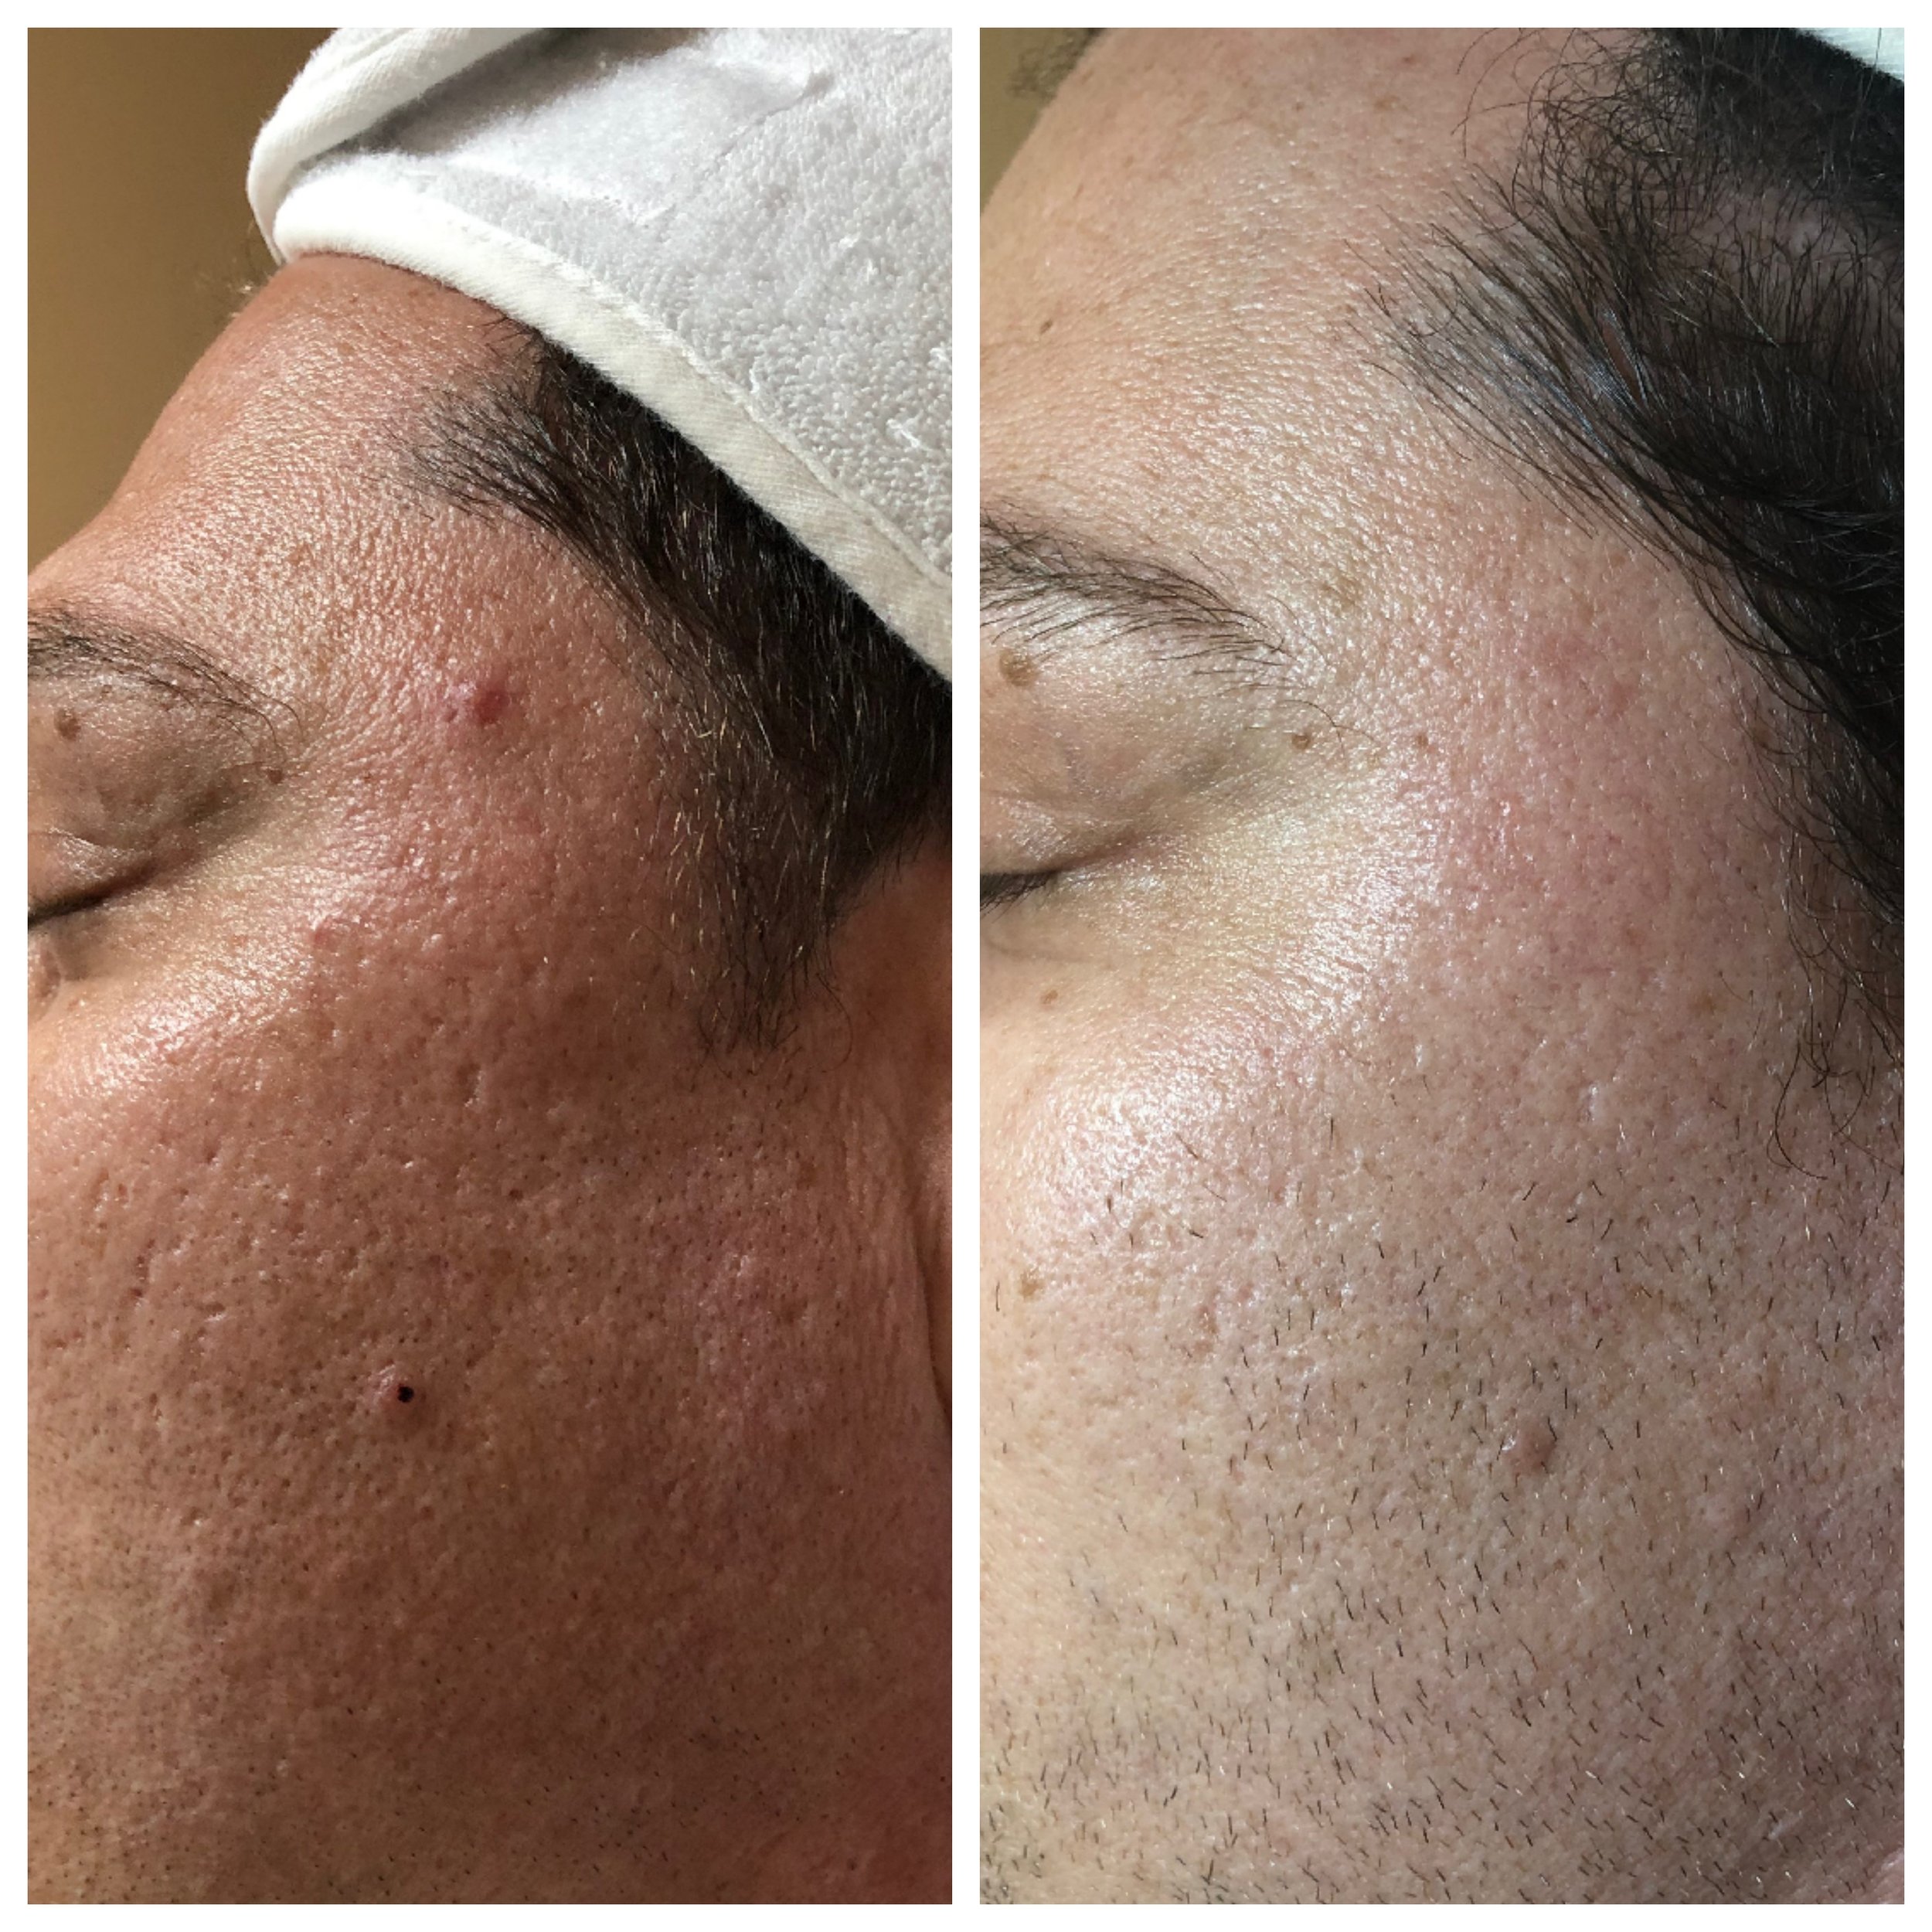  reduction in redness due to promoting blood flow, improvement in texture following a series of microneedling treatments 